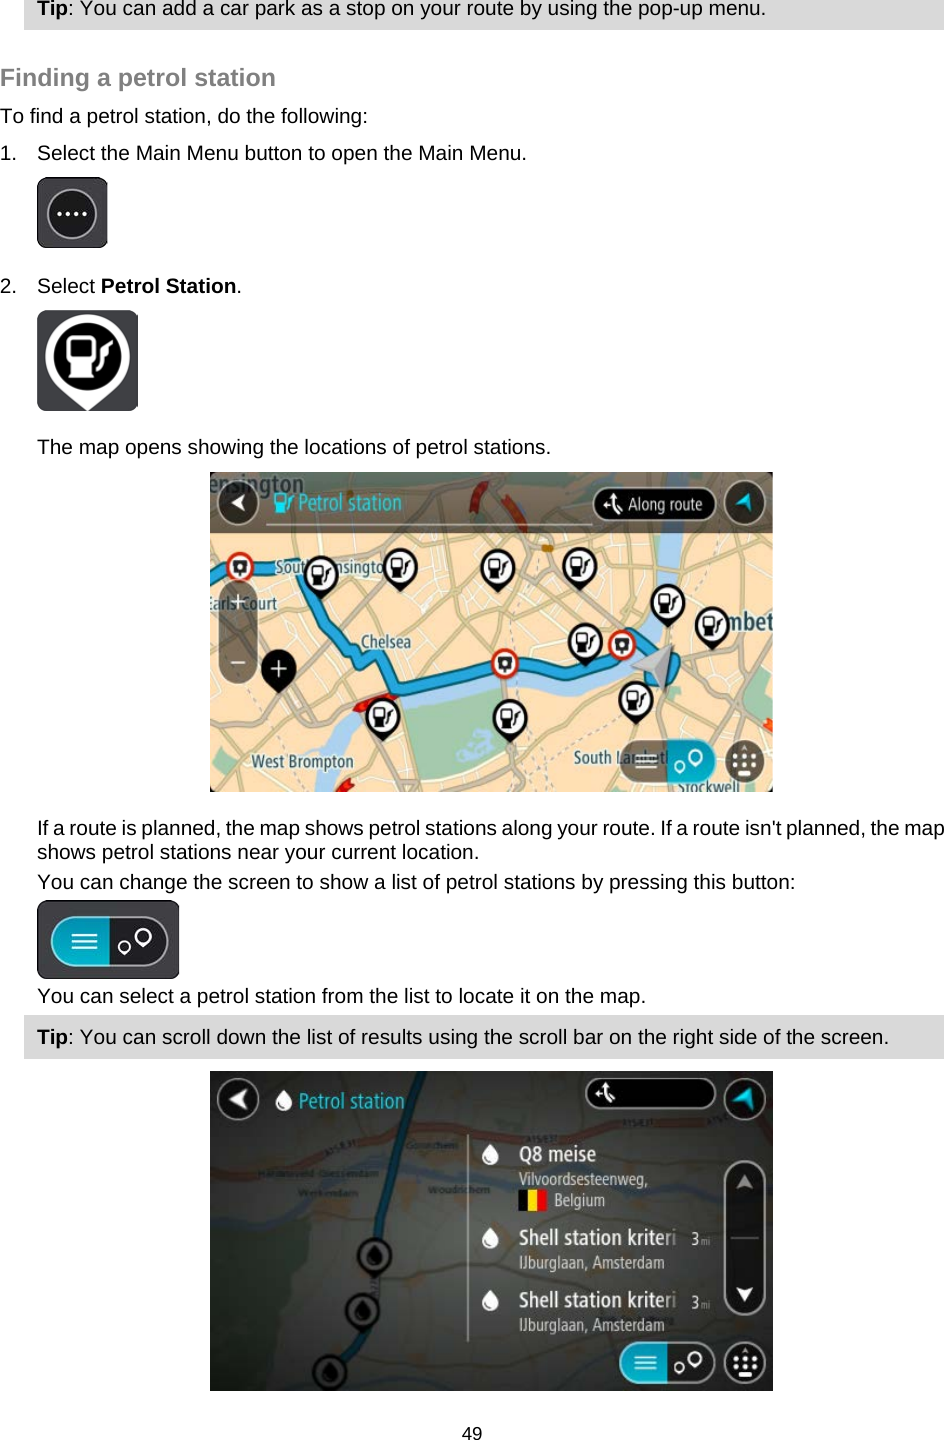  Tip: You can add a car park as a stop on your route by using the pop-up menu.  Finding a petrol station To find a petrol station, do the following: 1. Select the Main Menu button to open the Main Menu.   2. Select Petrol Station.  The map opens showing the locations of petrol stations.  If a route is planned, the map shows petrol stations along your route. If a route isn&apos;t planned, the map shows petrol stations near your current location. You can change the screen to show a list of petrol stations by pressing this button:  You can select a petrol station from the list to locate it on the map. Tip: You can scroll down the list of results using the scroll bar on the right side of the screen.  49   